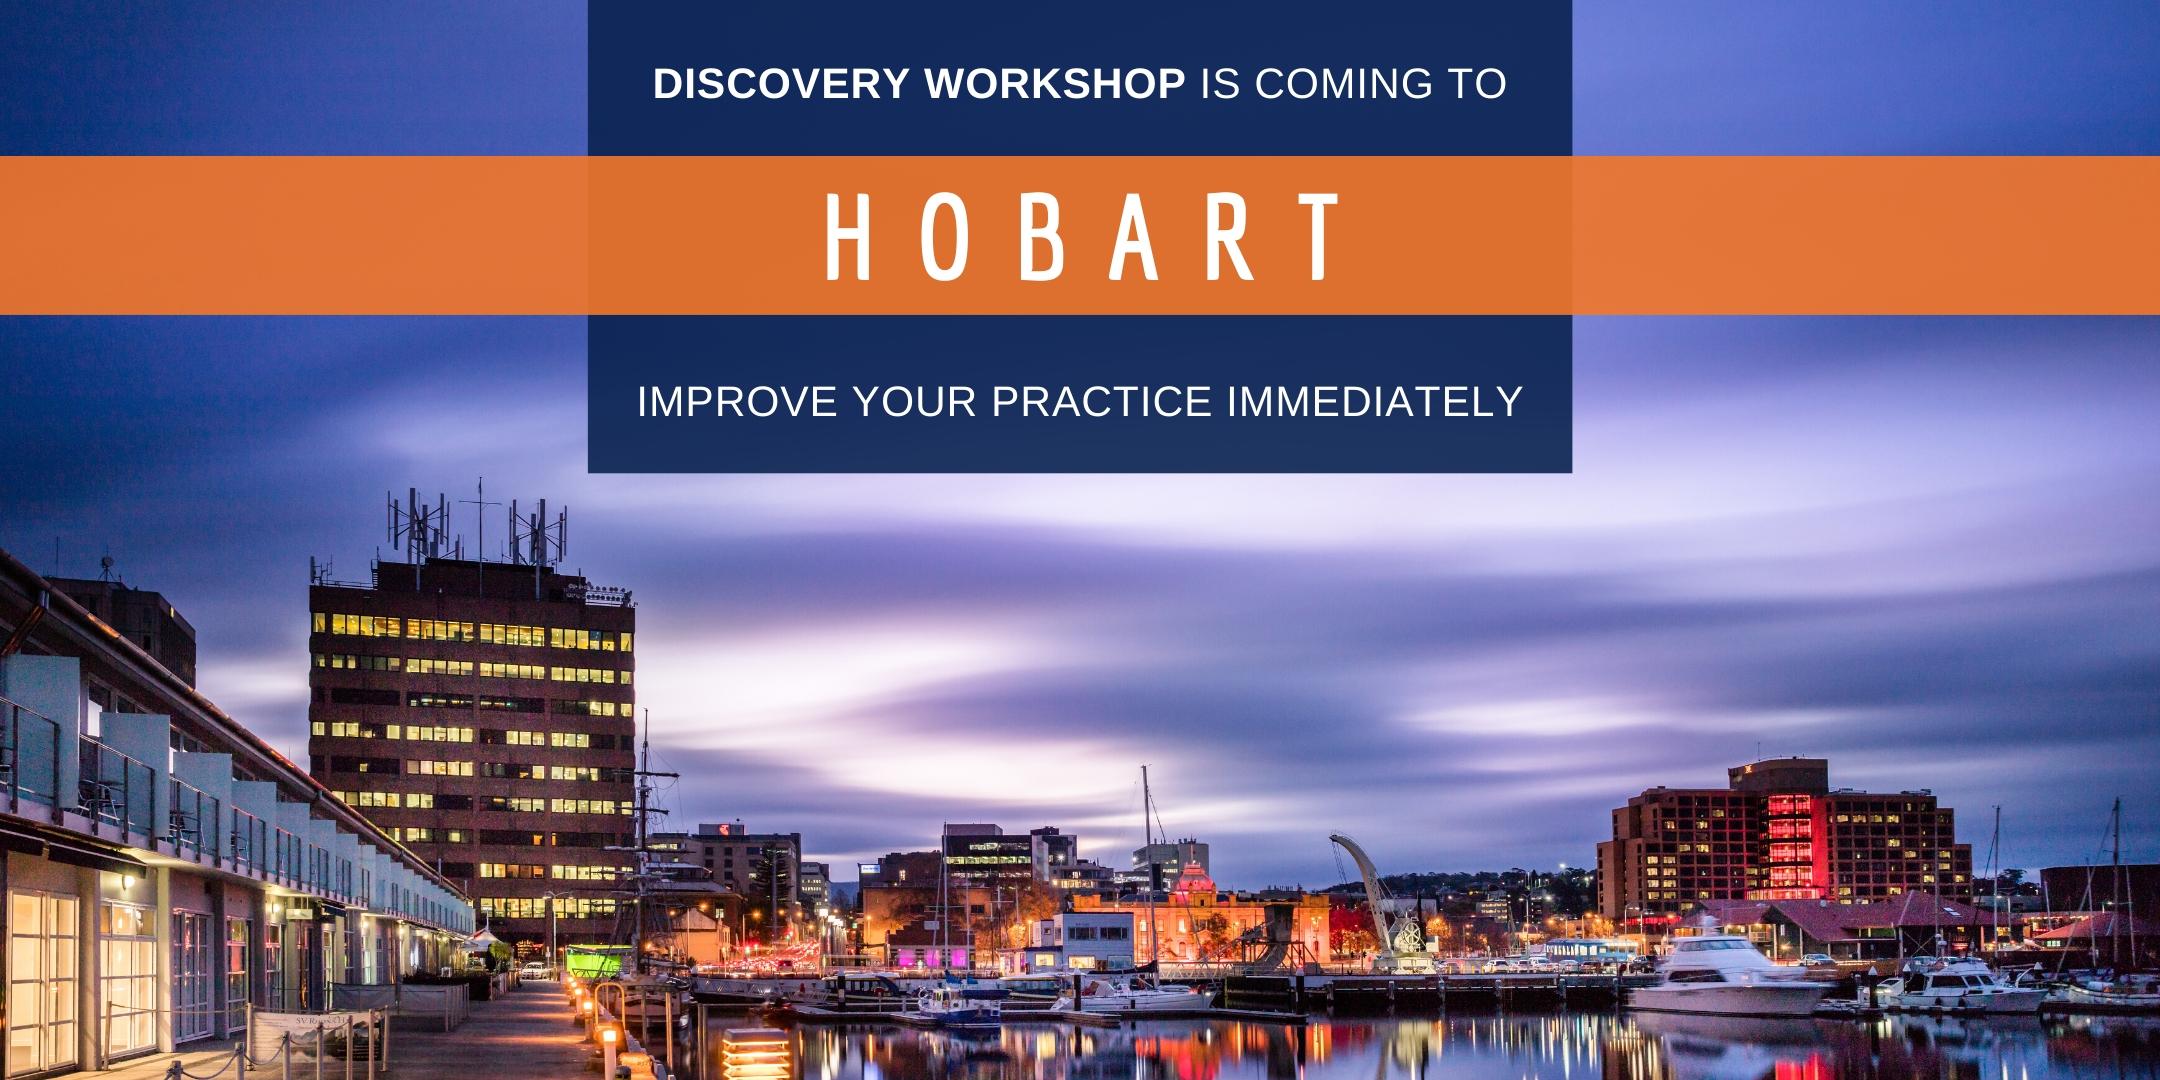 Discovery Workshop Hobart - Improve Your Practice Immediately